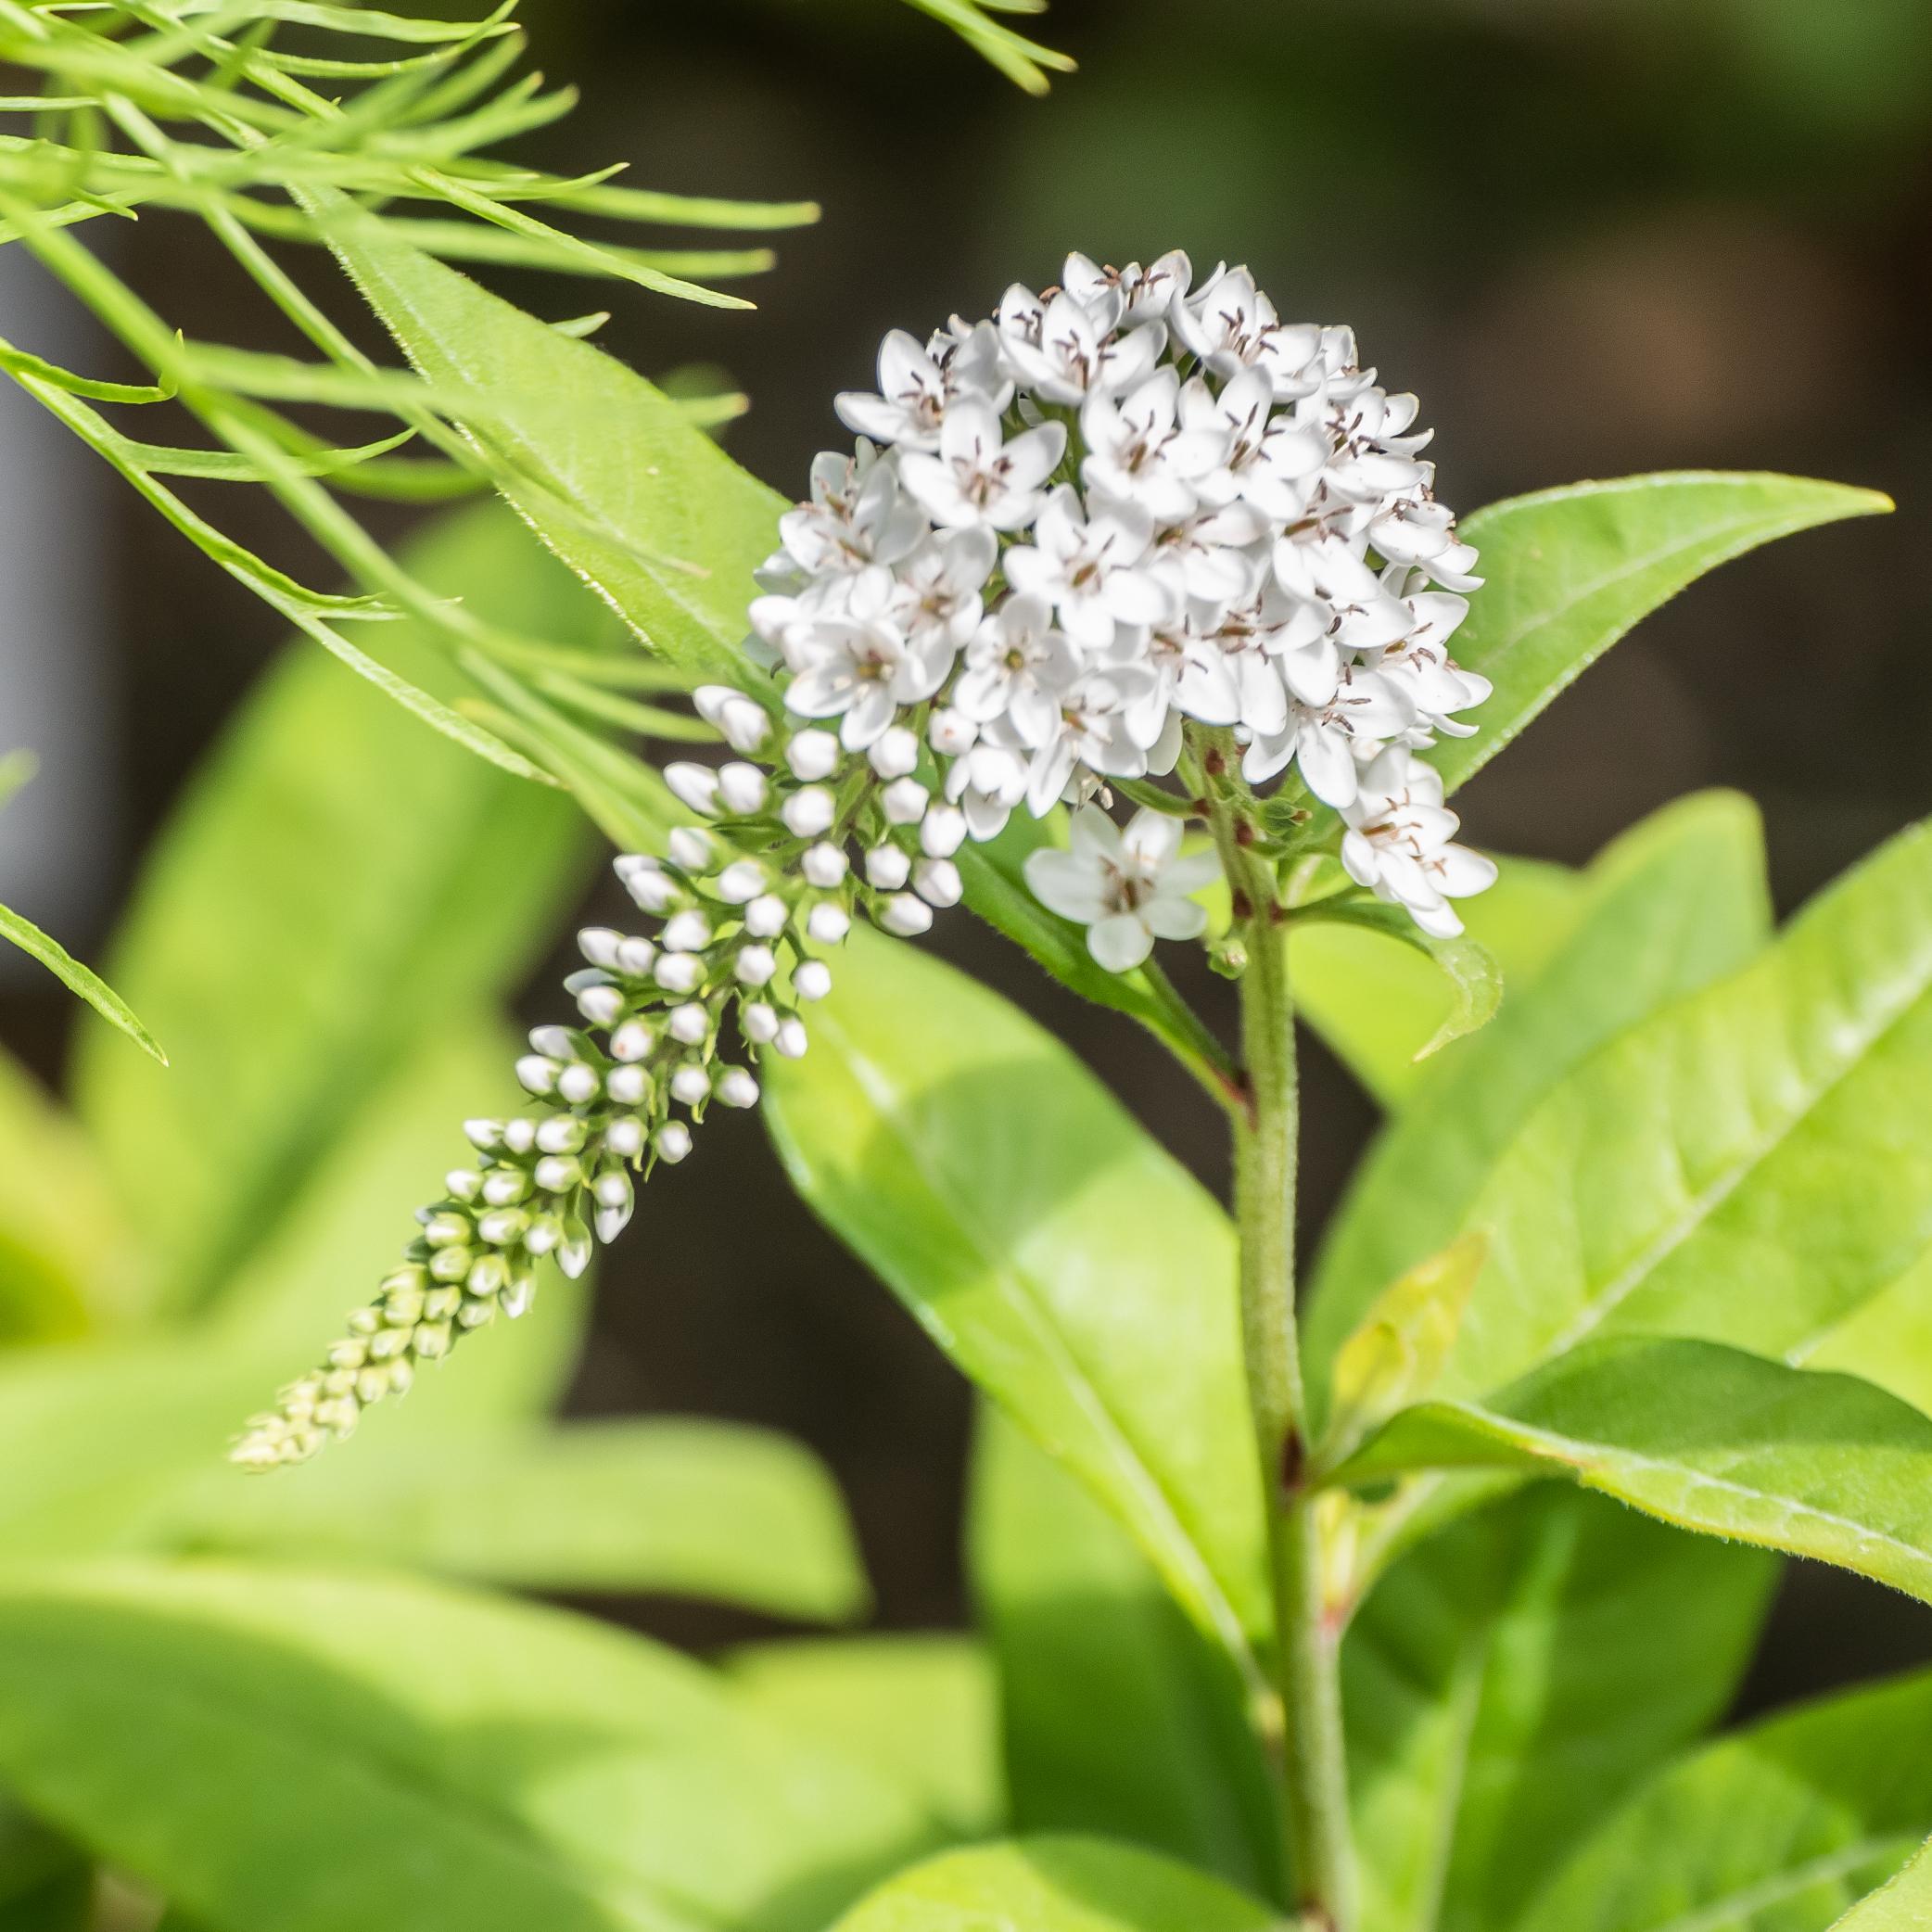 White flower with buds, brown anthers white midrib, green sepals, stems and leaves